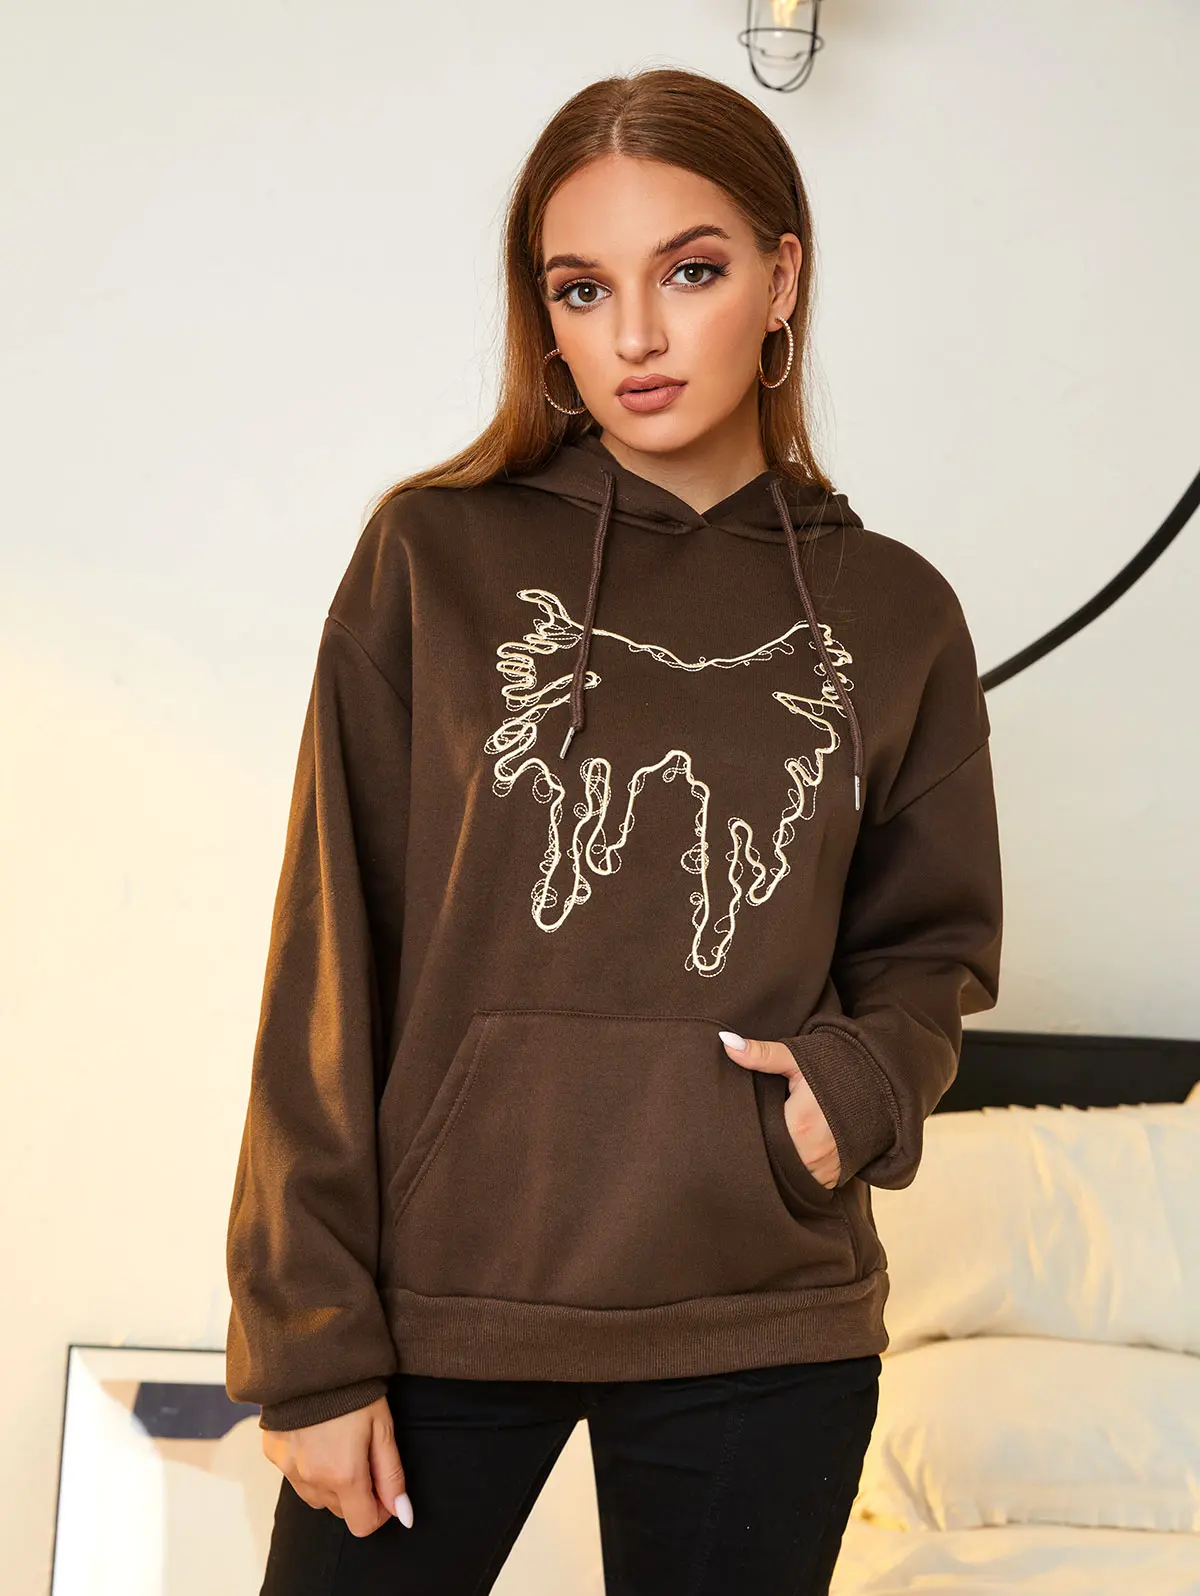 

ZAFUL Embroidered Fleece Lined Kangaroo Pocket Hoodie Women's Sweatshirts Hoodies Loose Pullover Back to College School Outfits